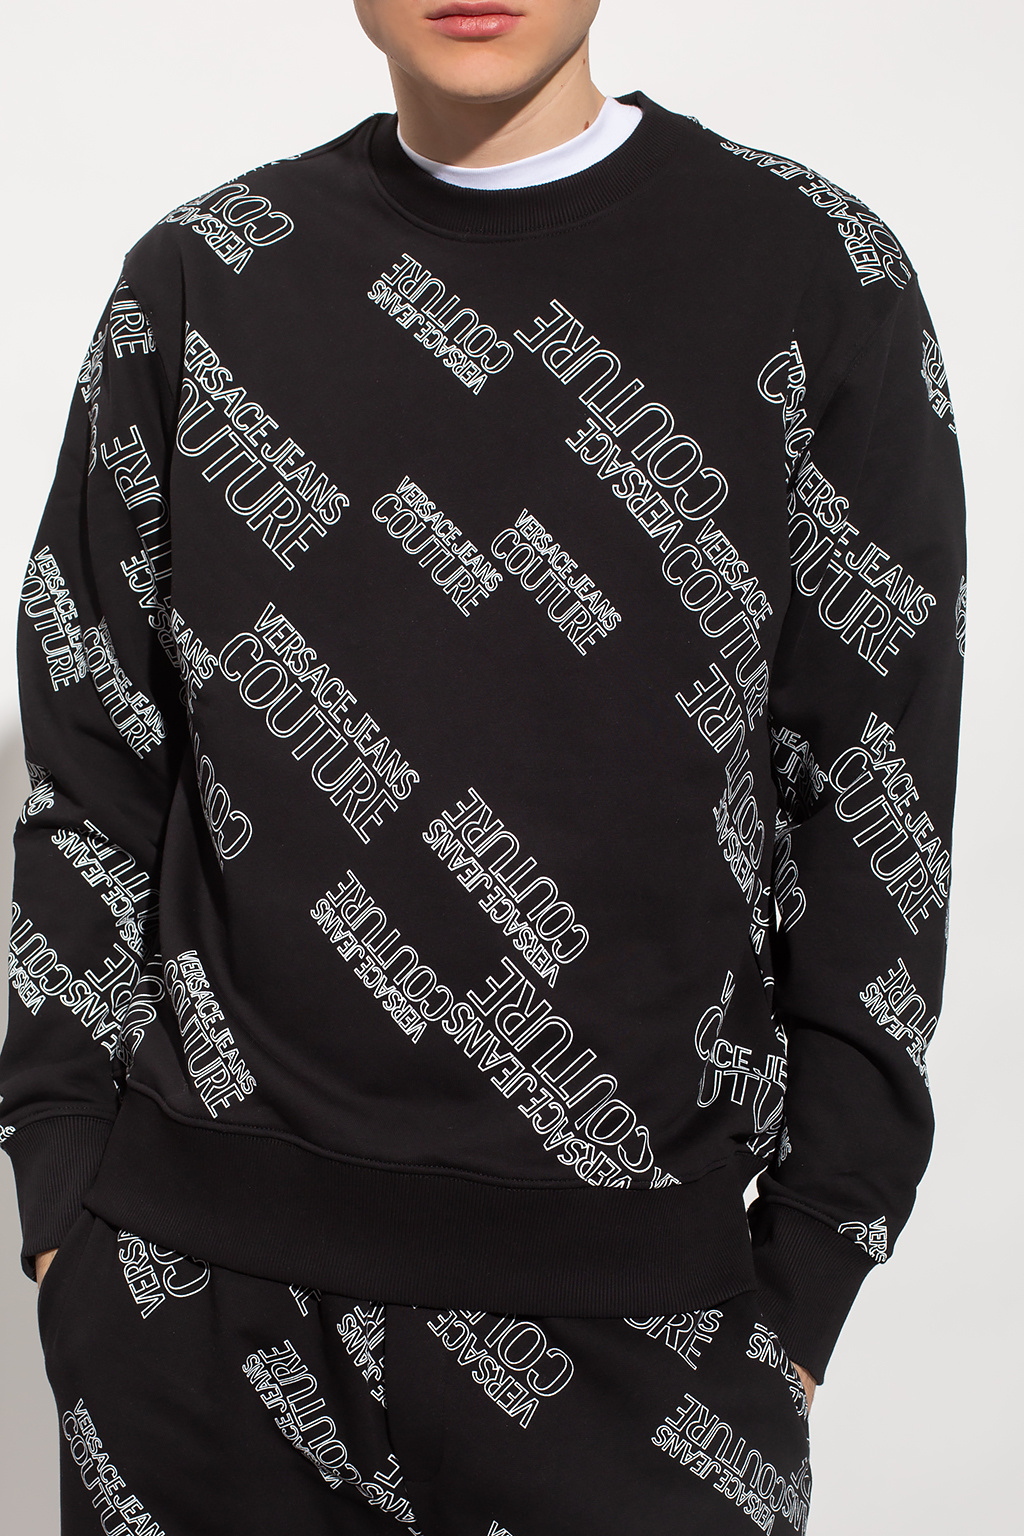 Versace Jeans Couture Sweatshirt with logo